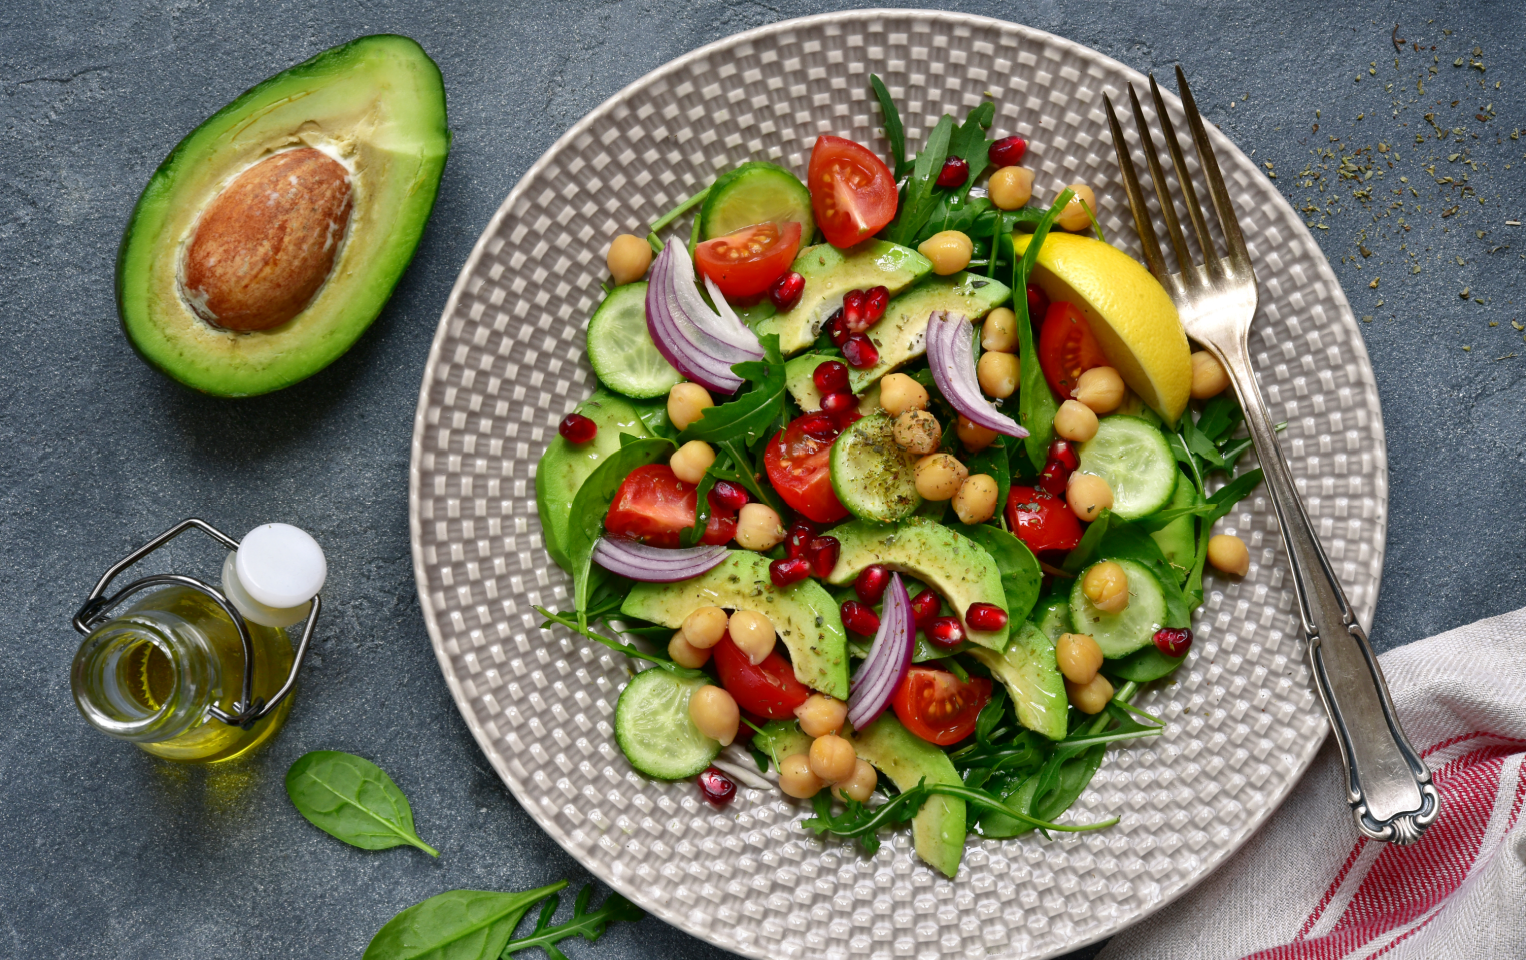 A plate of chickpea, lemon, tomato, and cucumber salad with an avocado and fork on the side placed on a grey table.